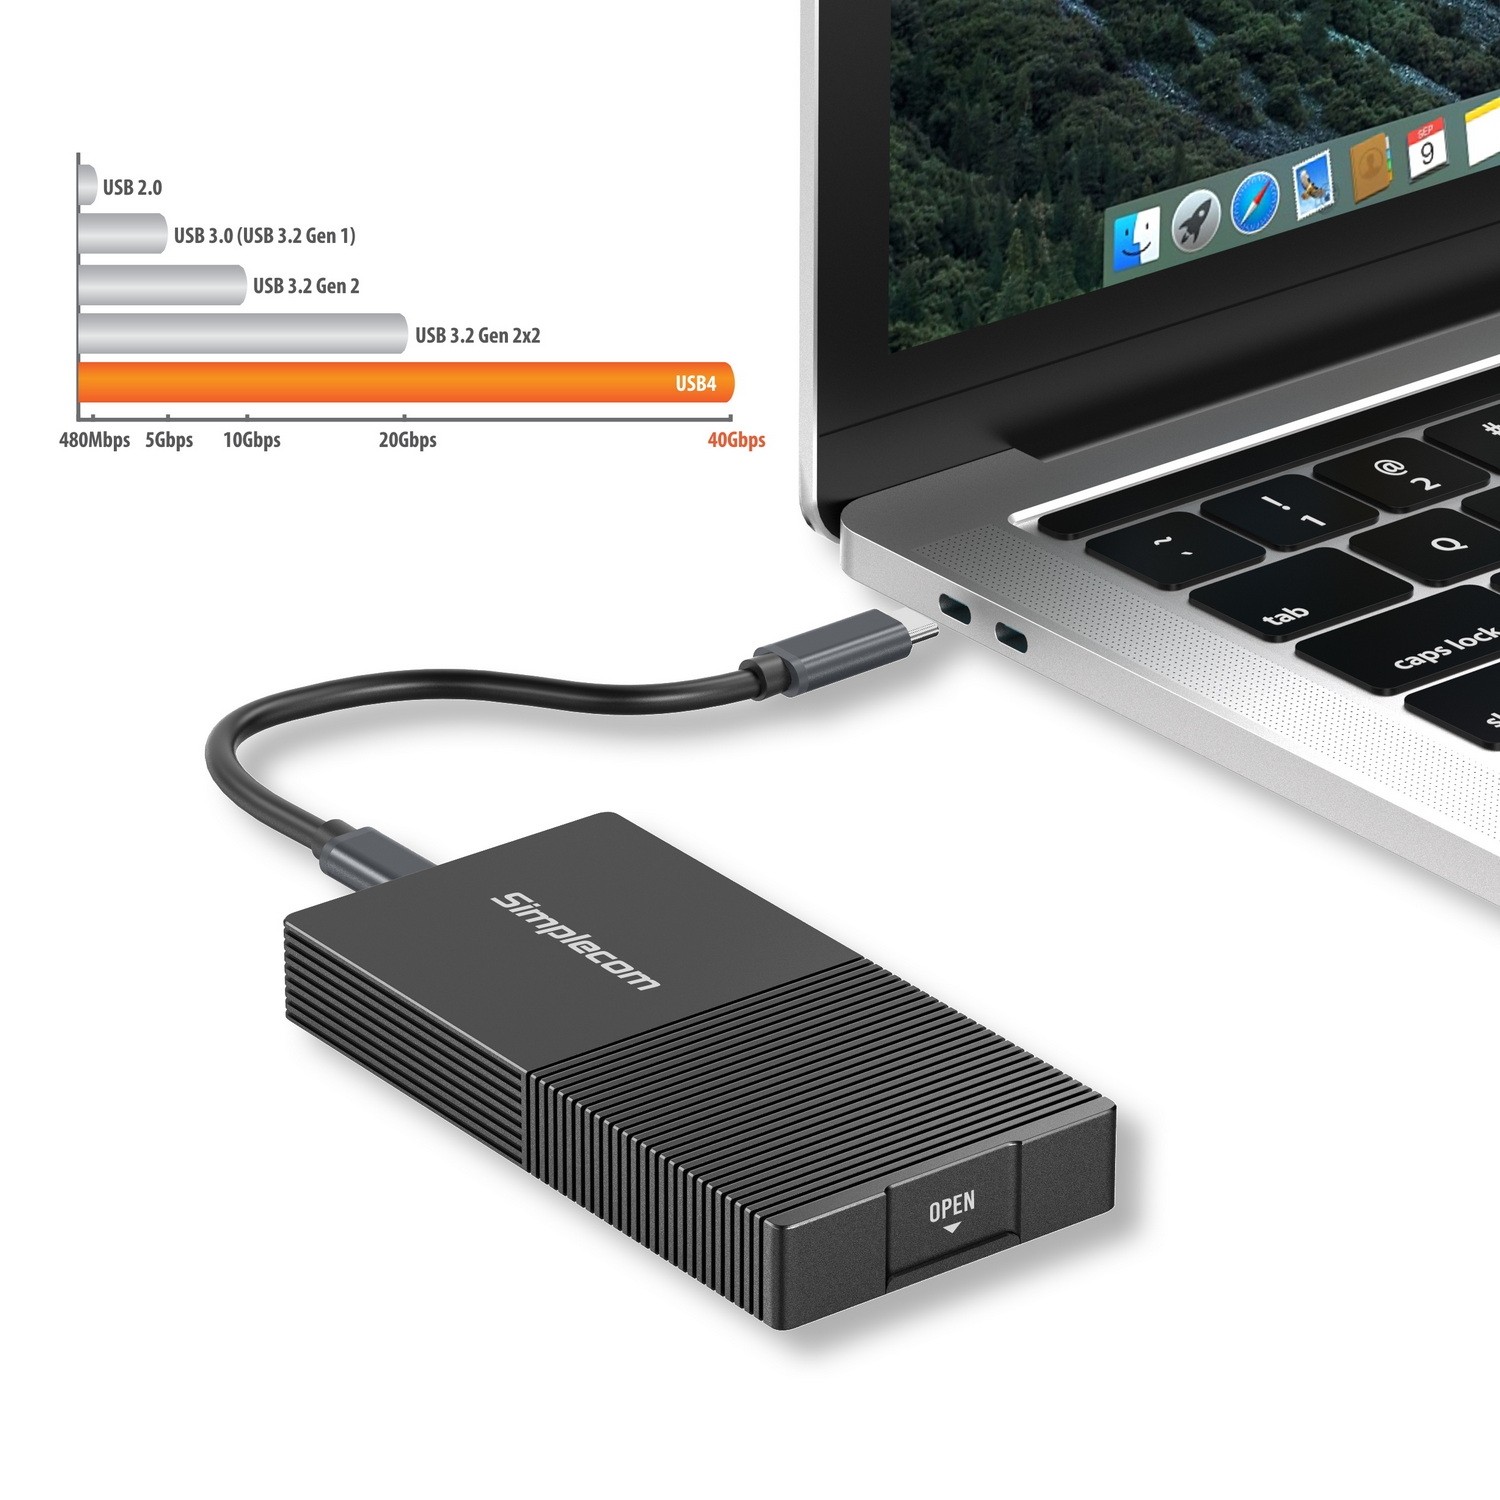 A large marketing image providing additional information about the product Simplecom SE640 USB4 to NVMe M.2 SSD USB-C Enclosure 40Gbps - Additional alt info not provided